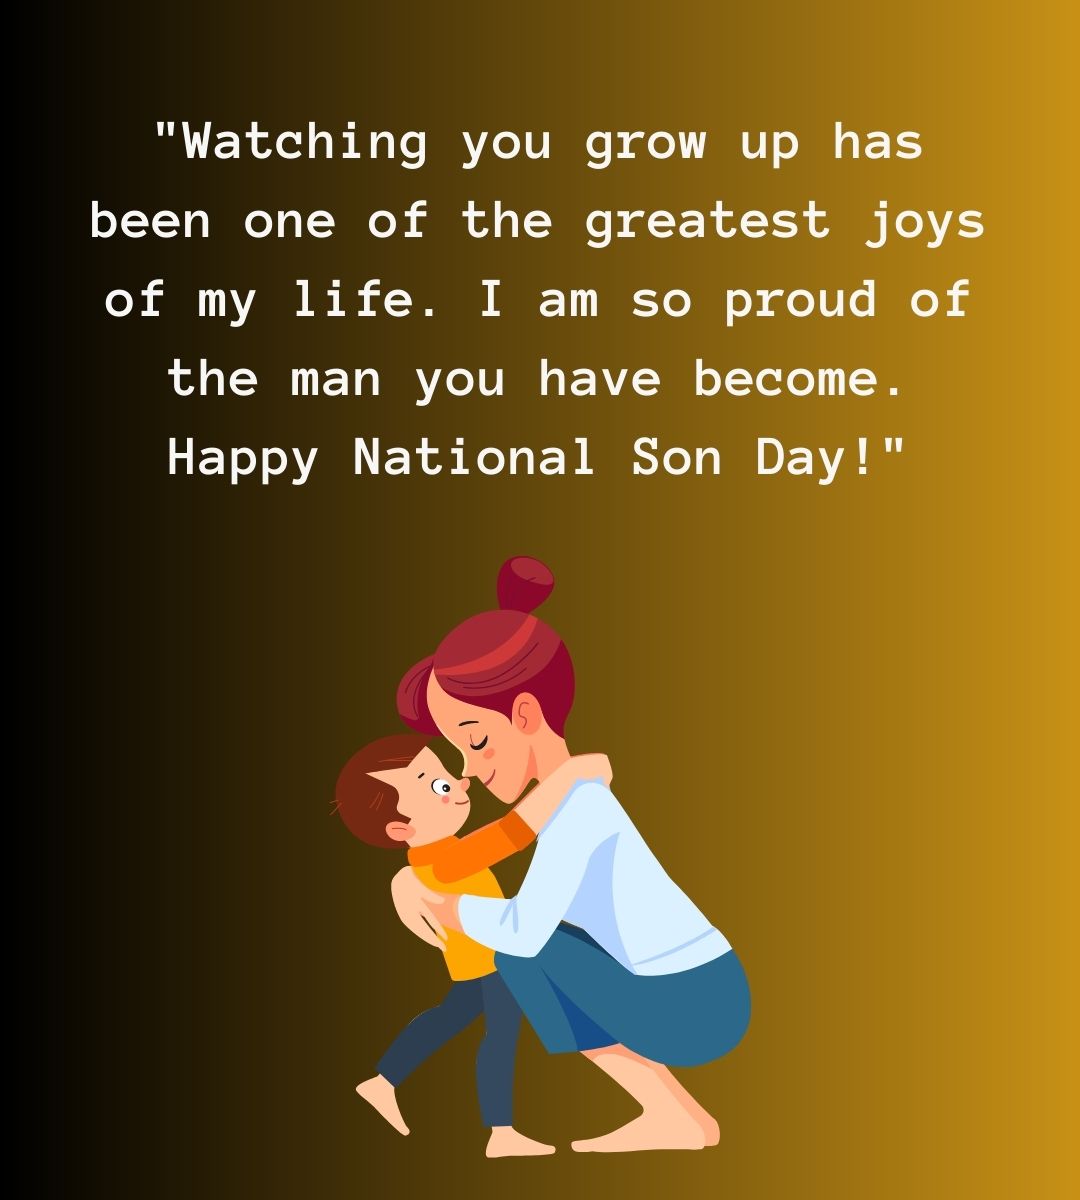 National Son Day Quotes from Moms to Celebrate the Special Bond (Images